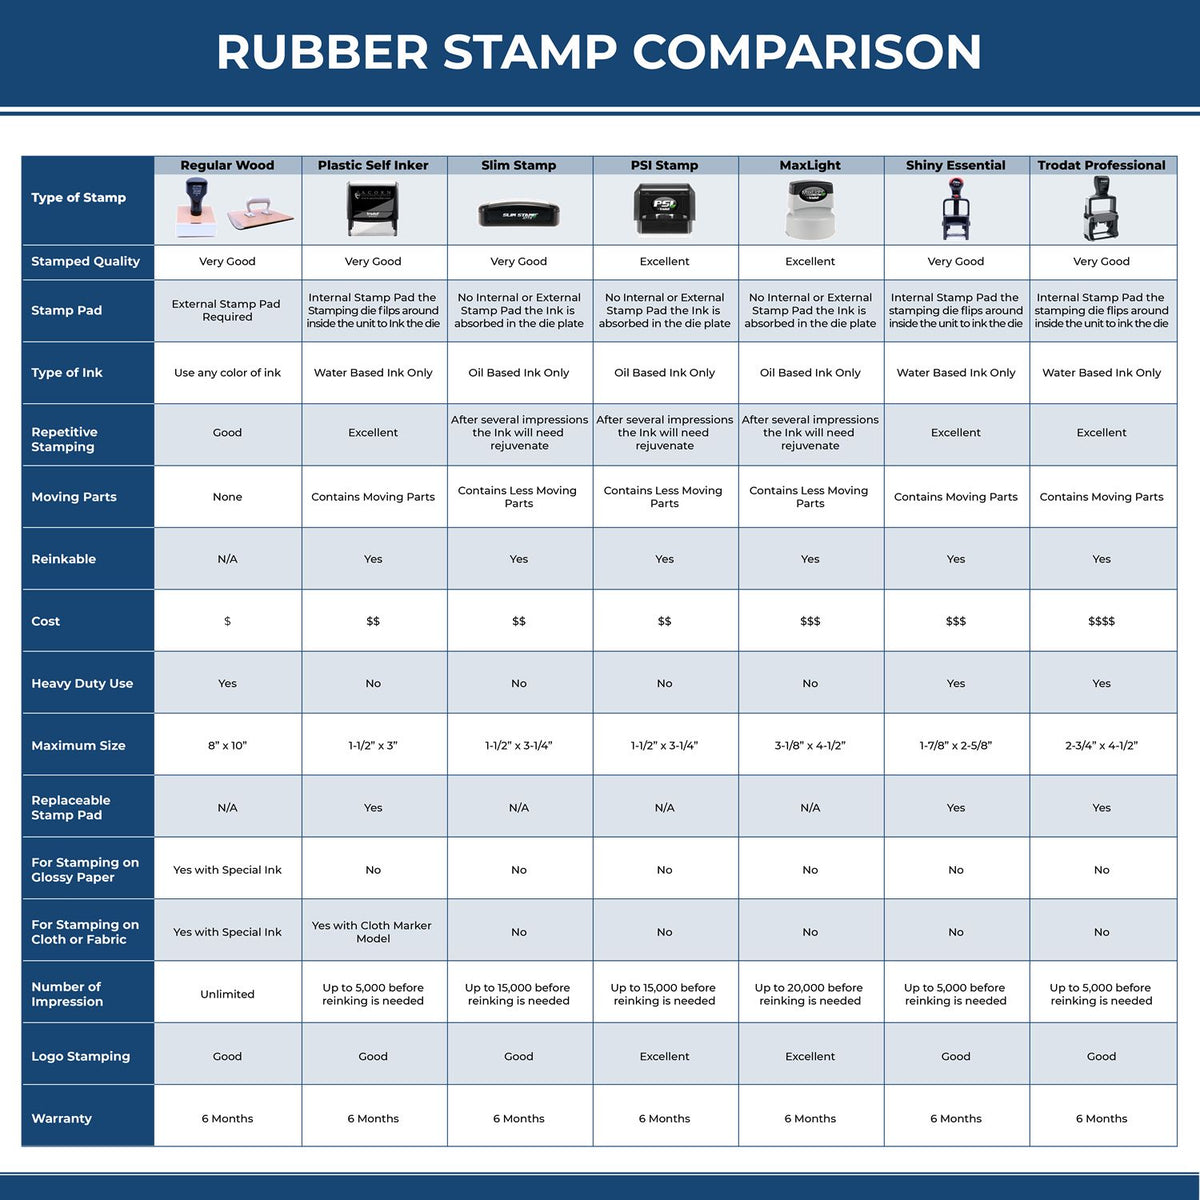 A comparison chart for the different types of mount models available for the Premium MaxLight Pre-Inked Connecticut Engineering Stamp.